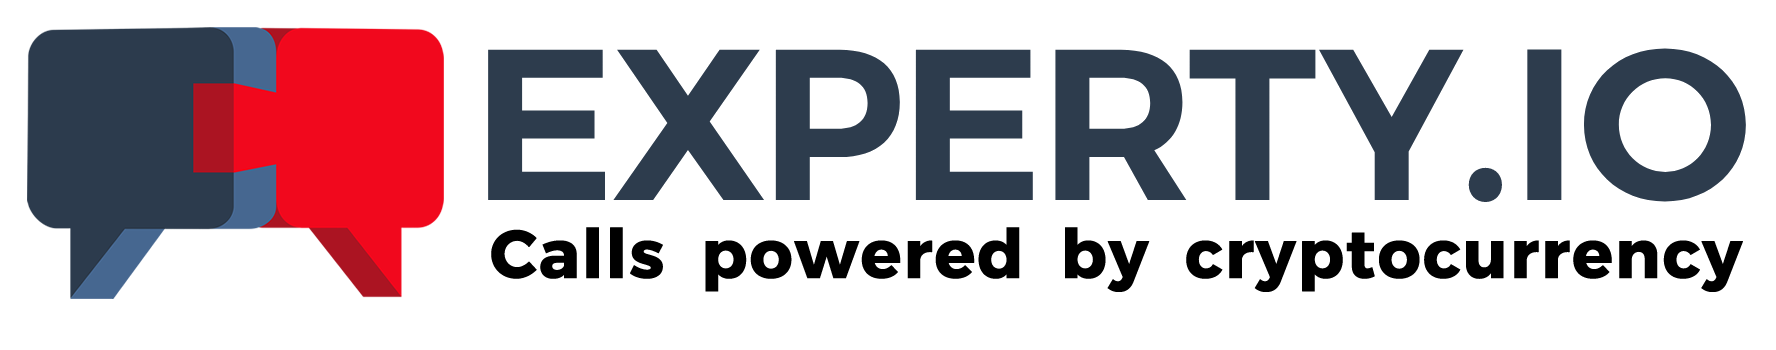 Experty announces Proof of Care